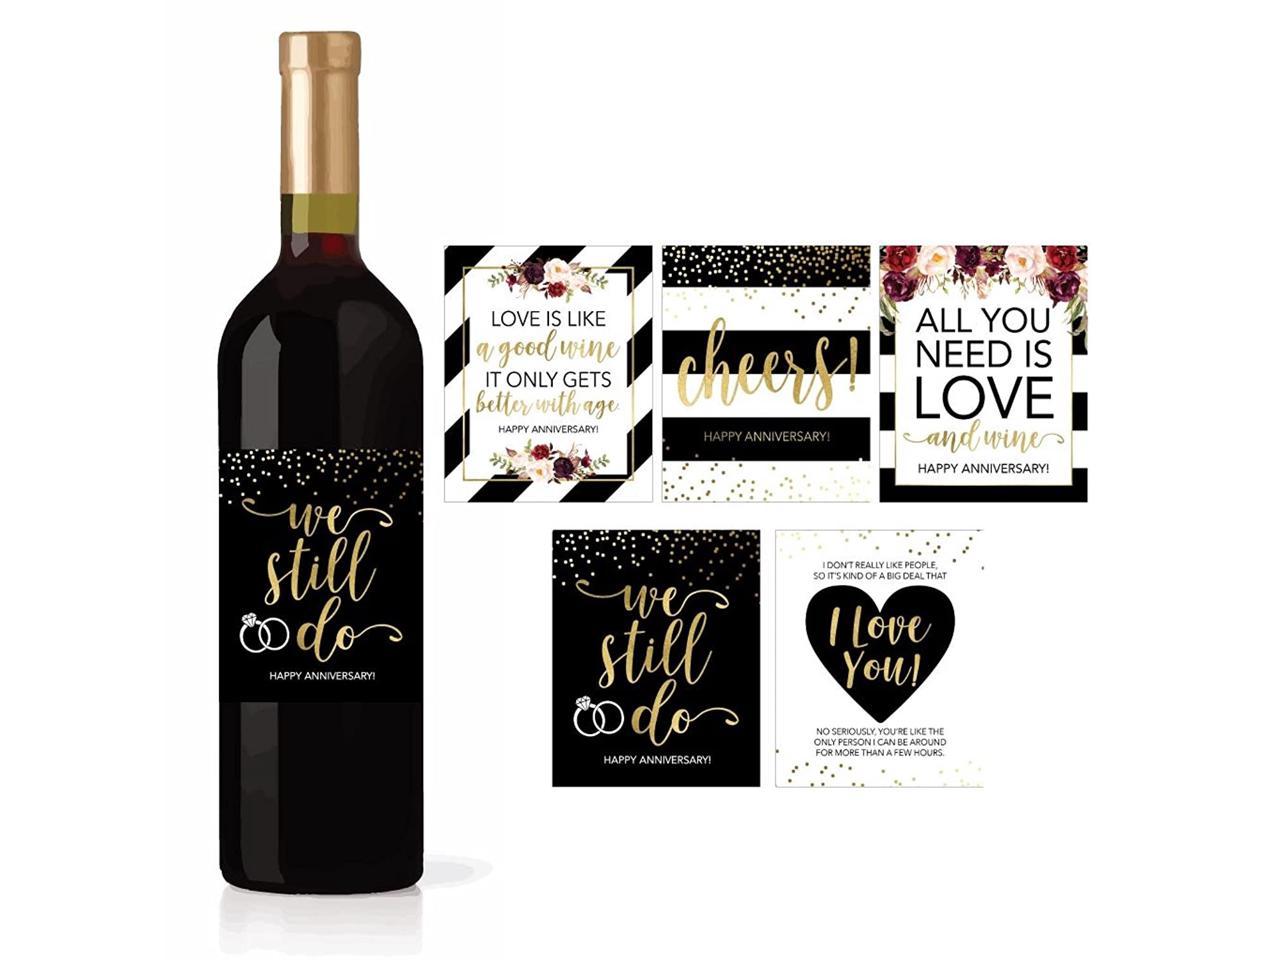 Keep Calm 25th Silver Wedding Anniversary Wine bottle label Celebration Gift for Women and Men. 